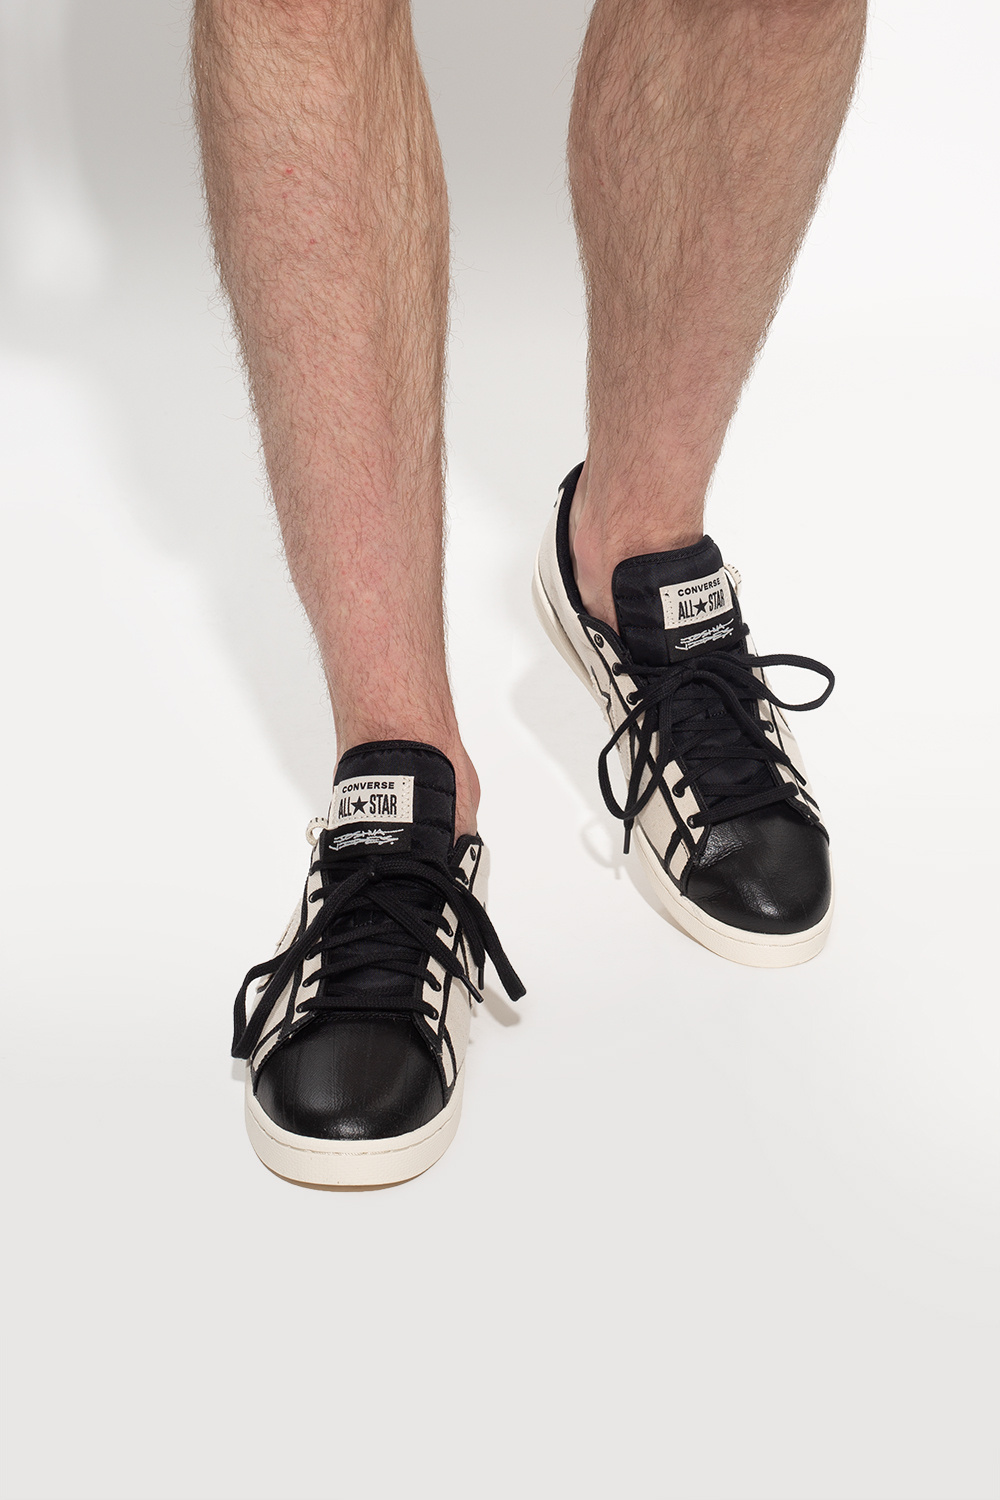 IetpShops Spain - Converse The latest collaboration between